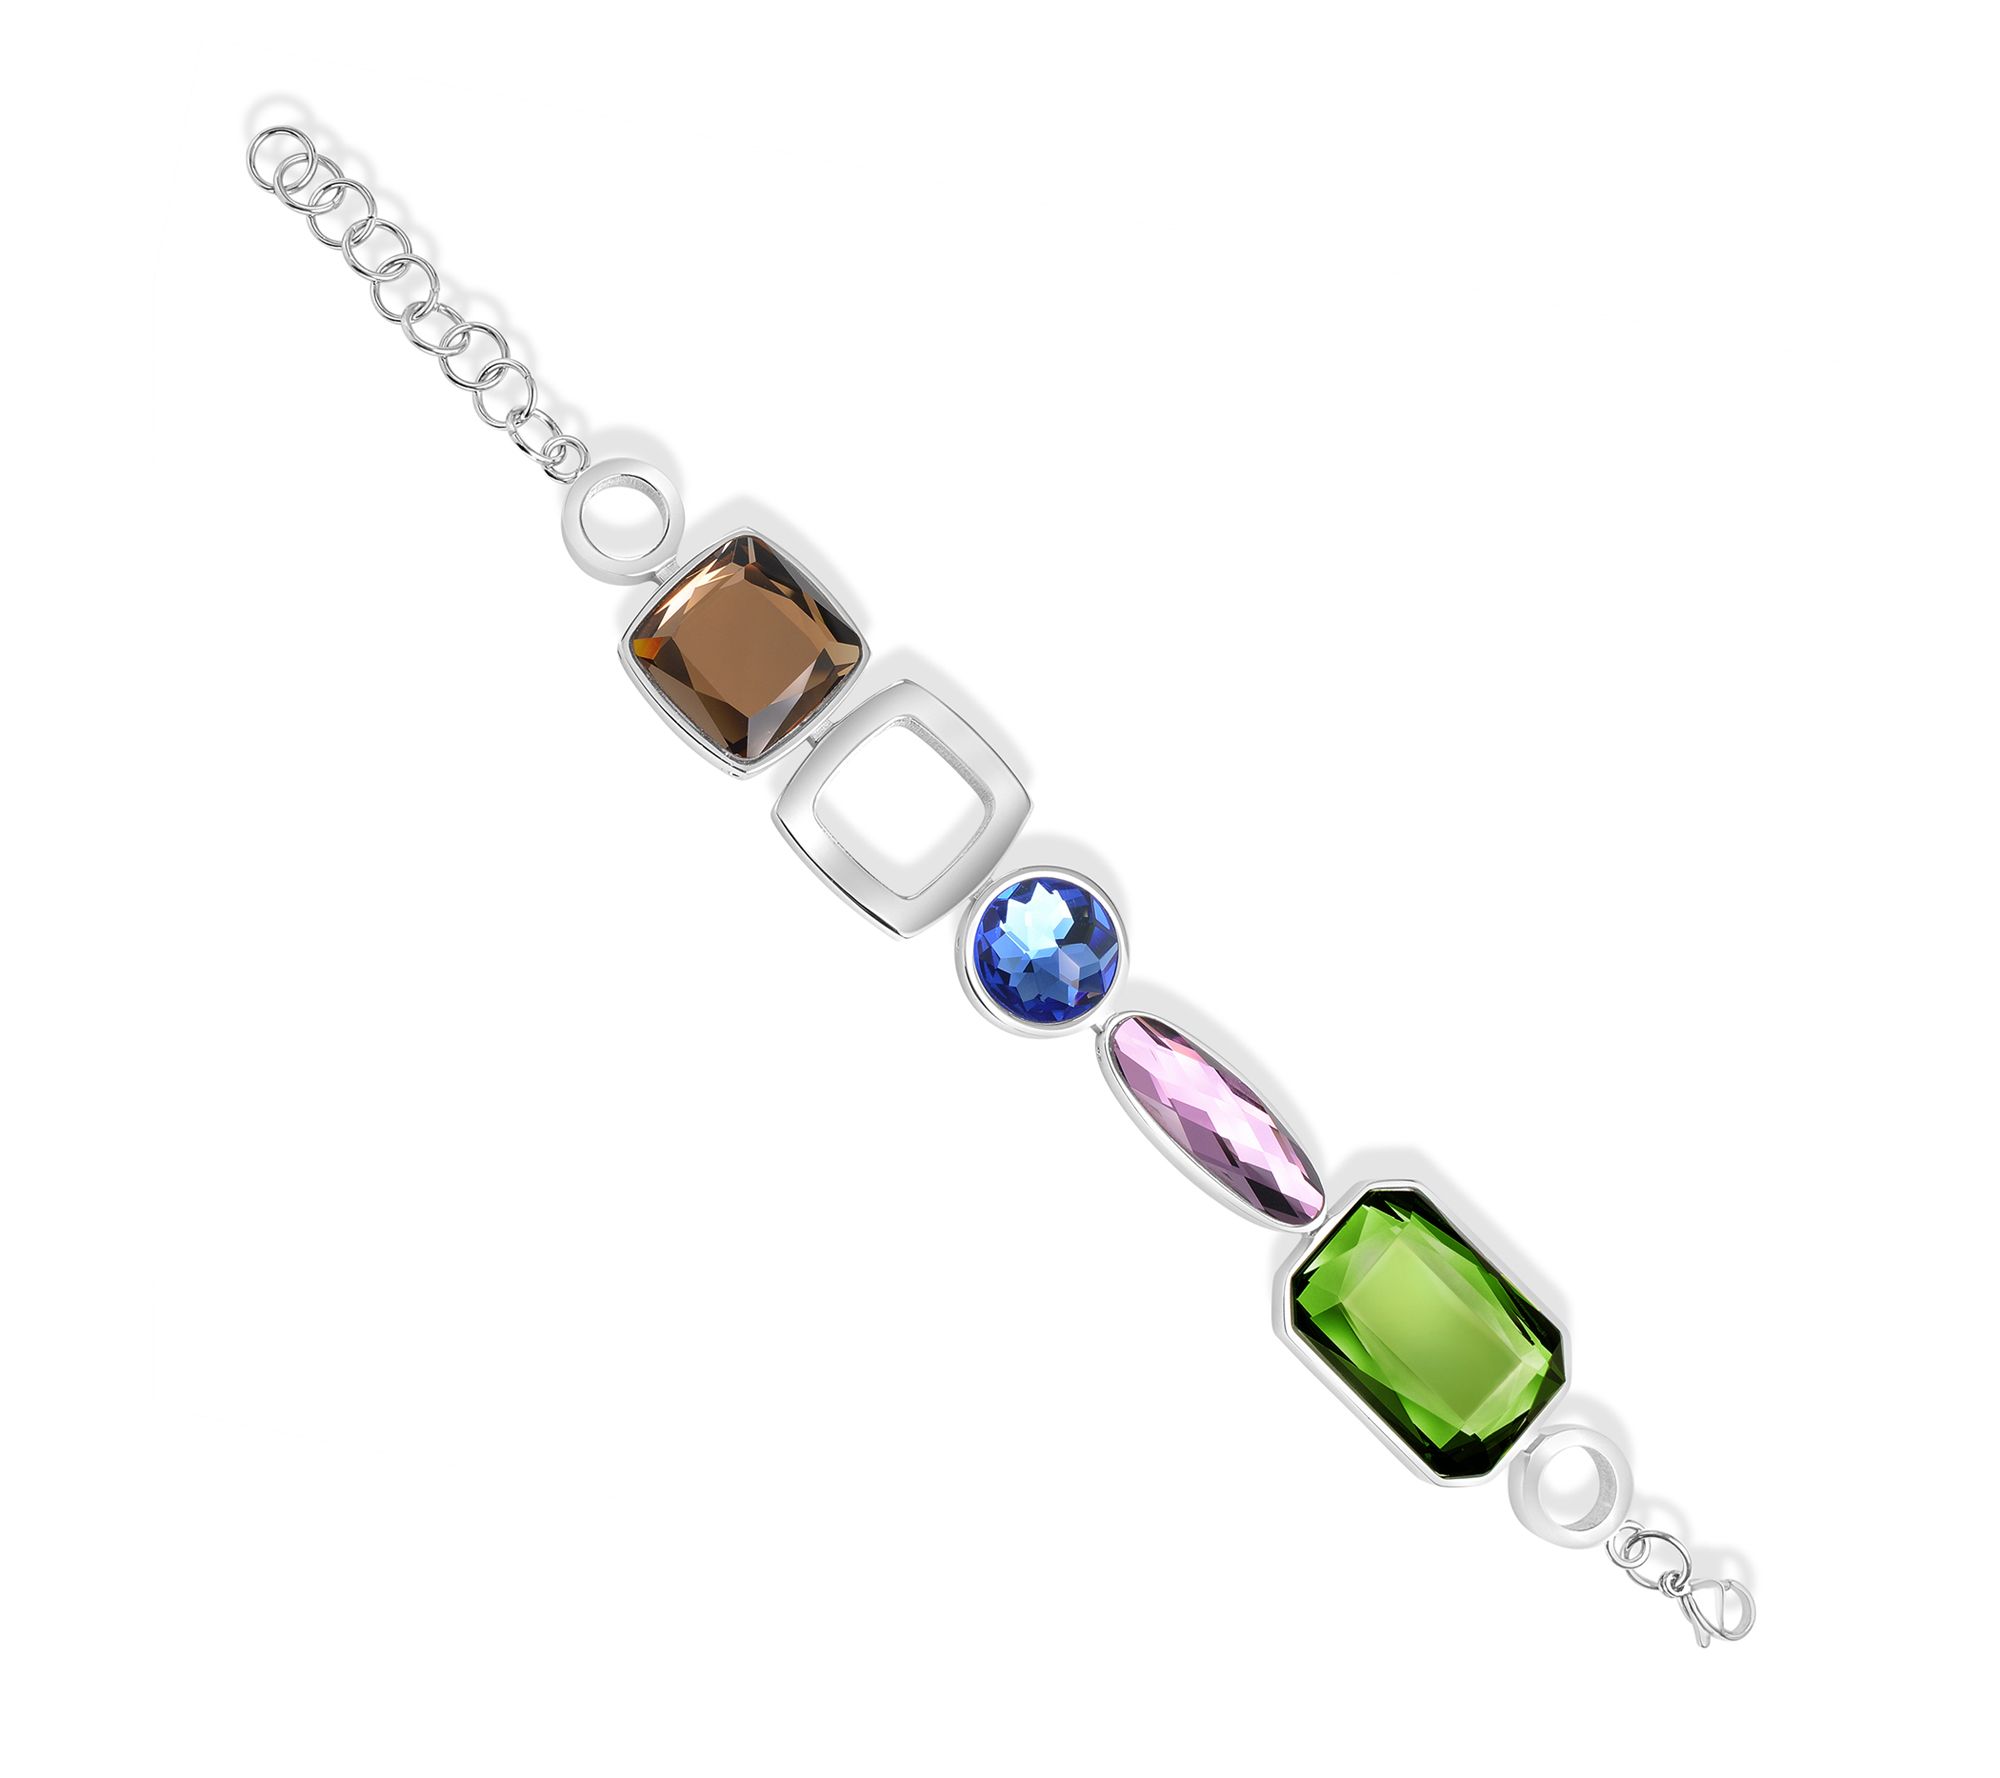 Bracelet, stretch, glass and silver-finished steel, multicolored